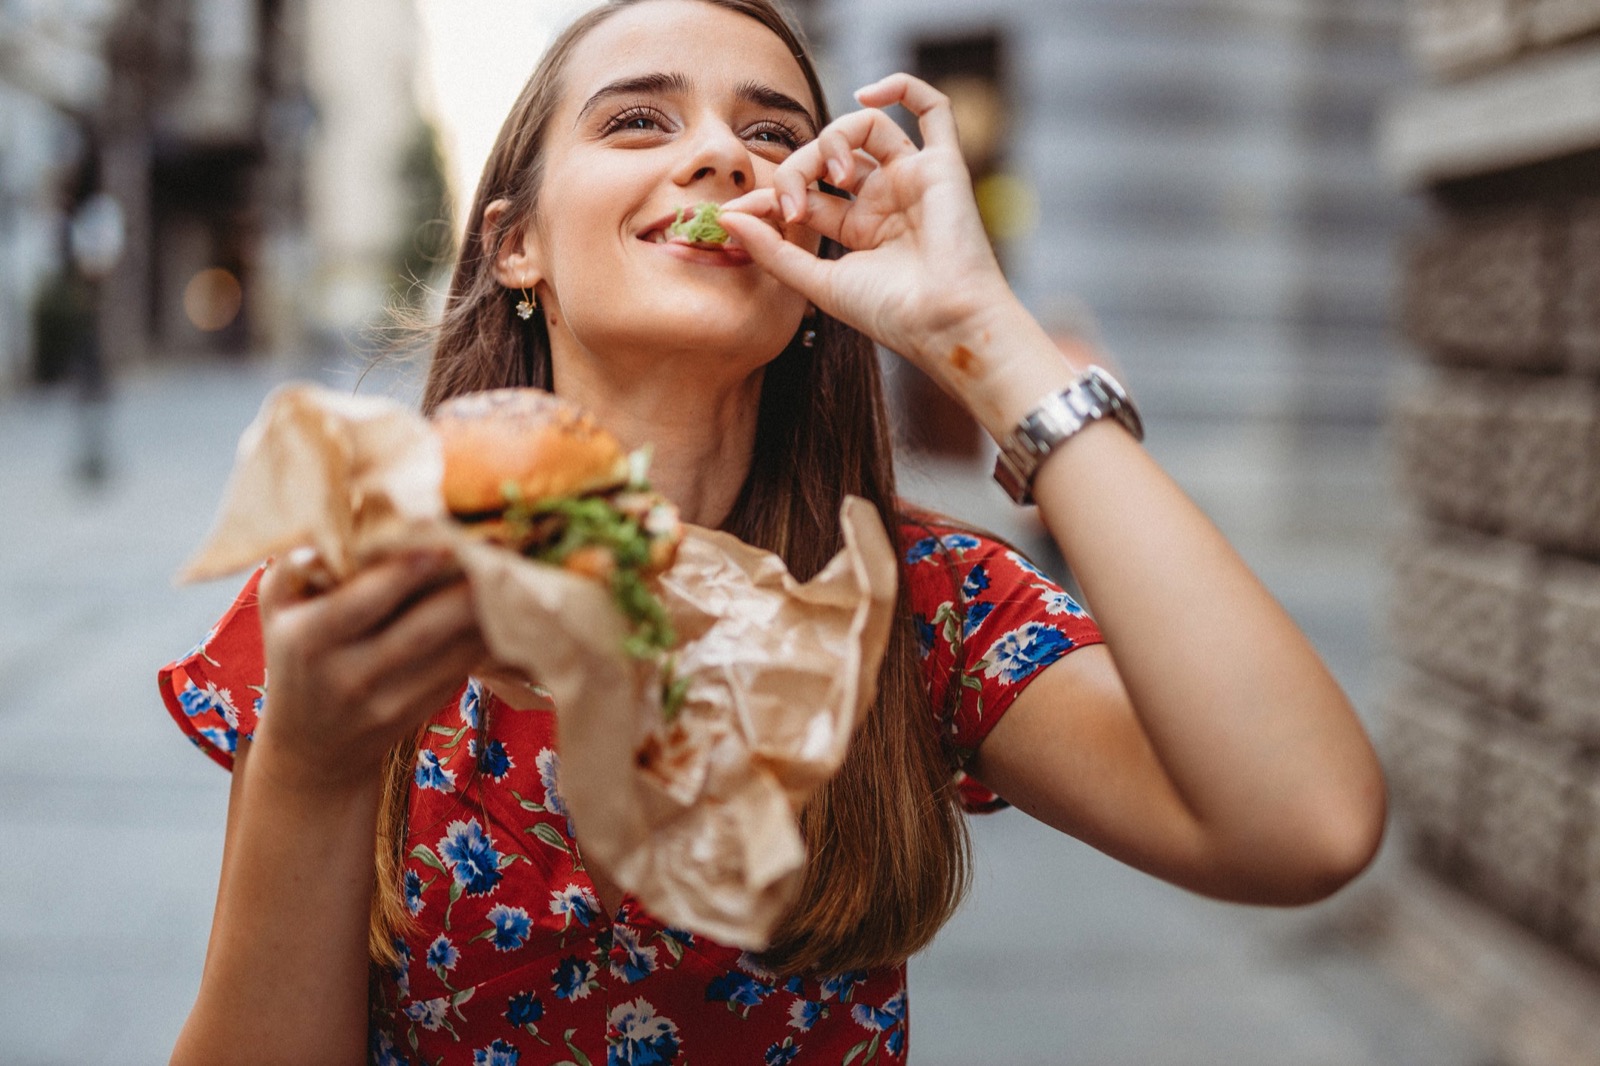 Are You American, Australian, British, Or Canadian When It Comes to Eating? Woman Eating Burger